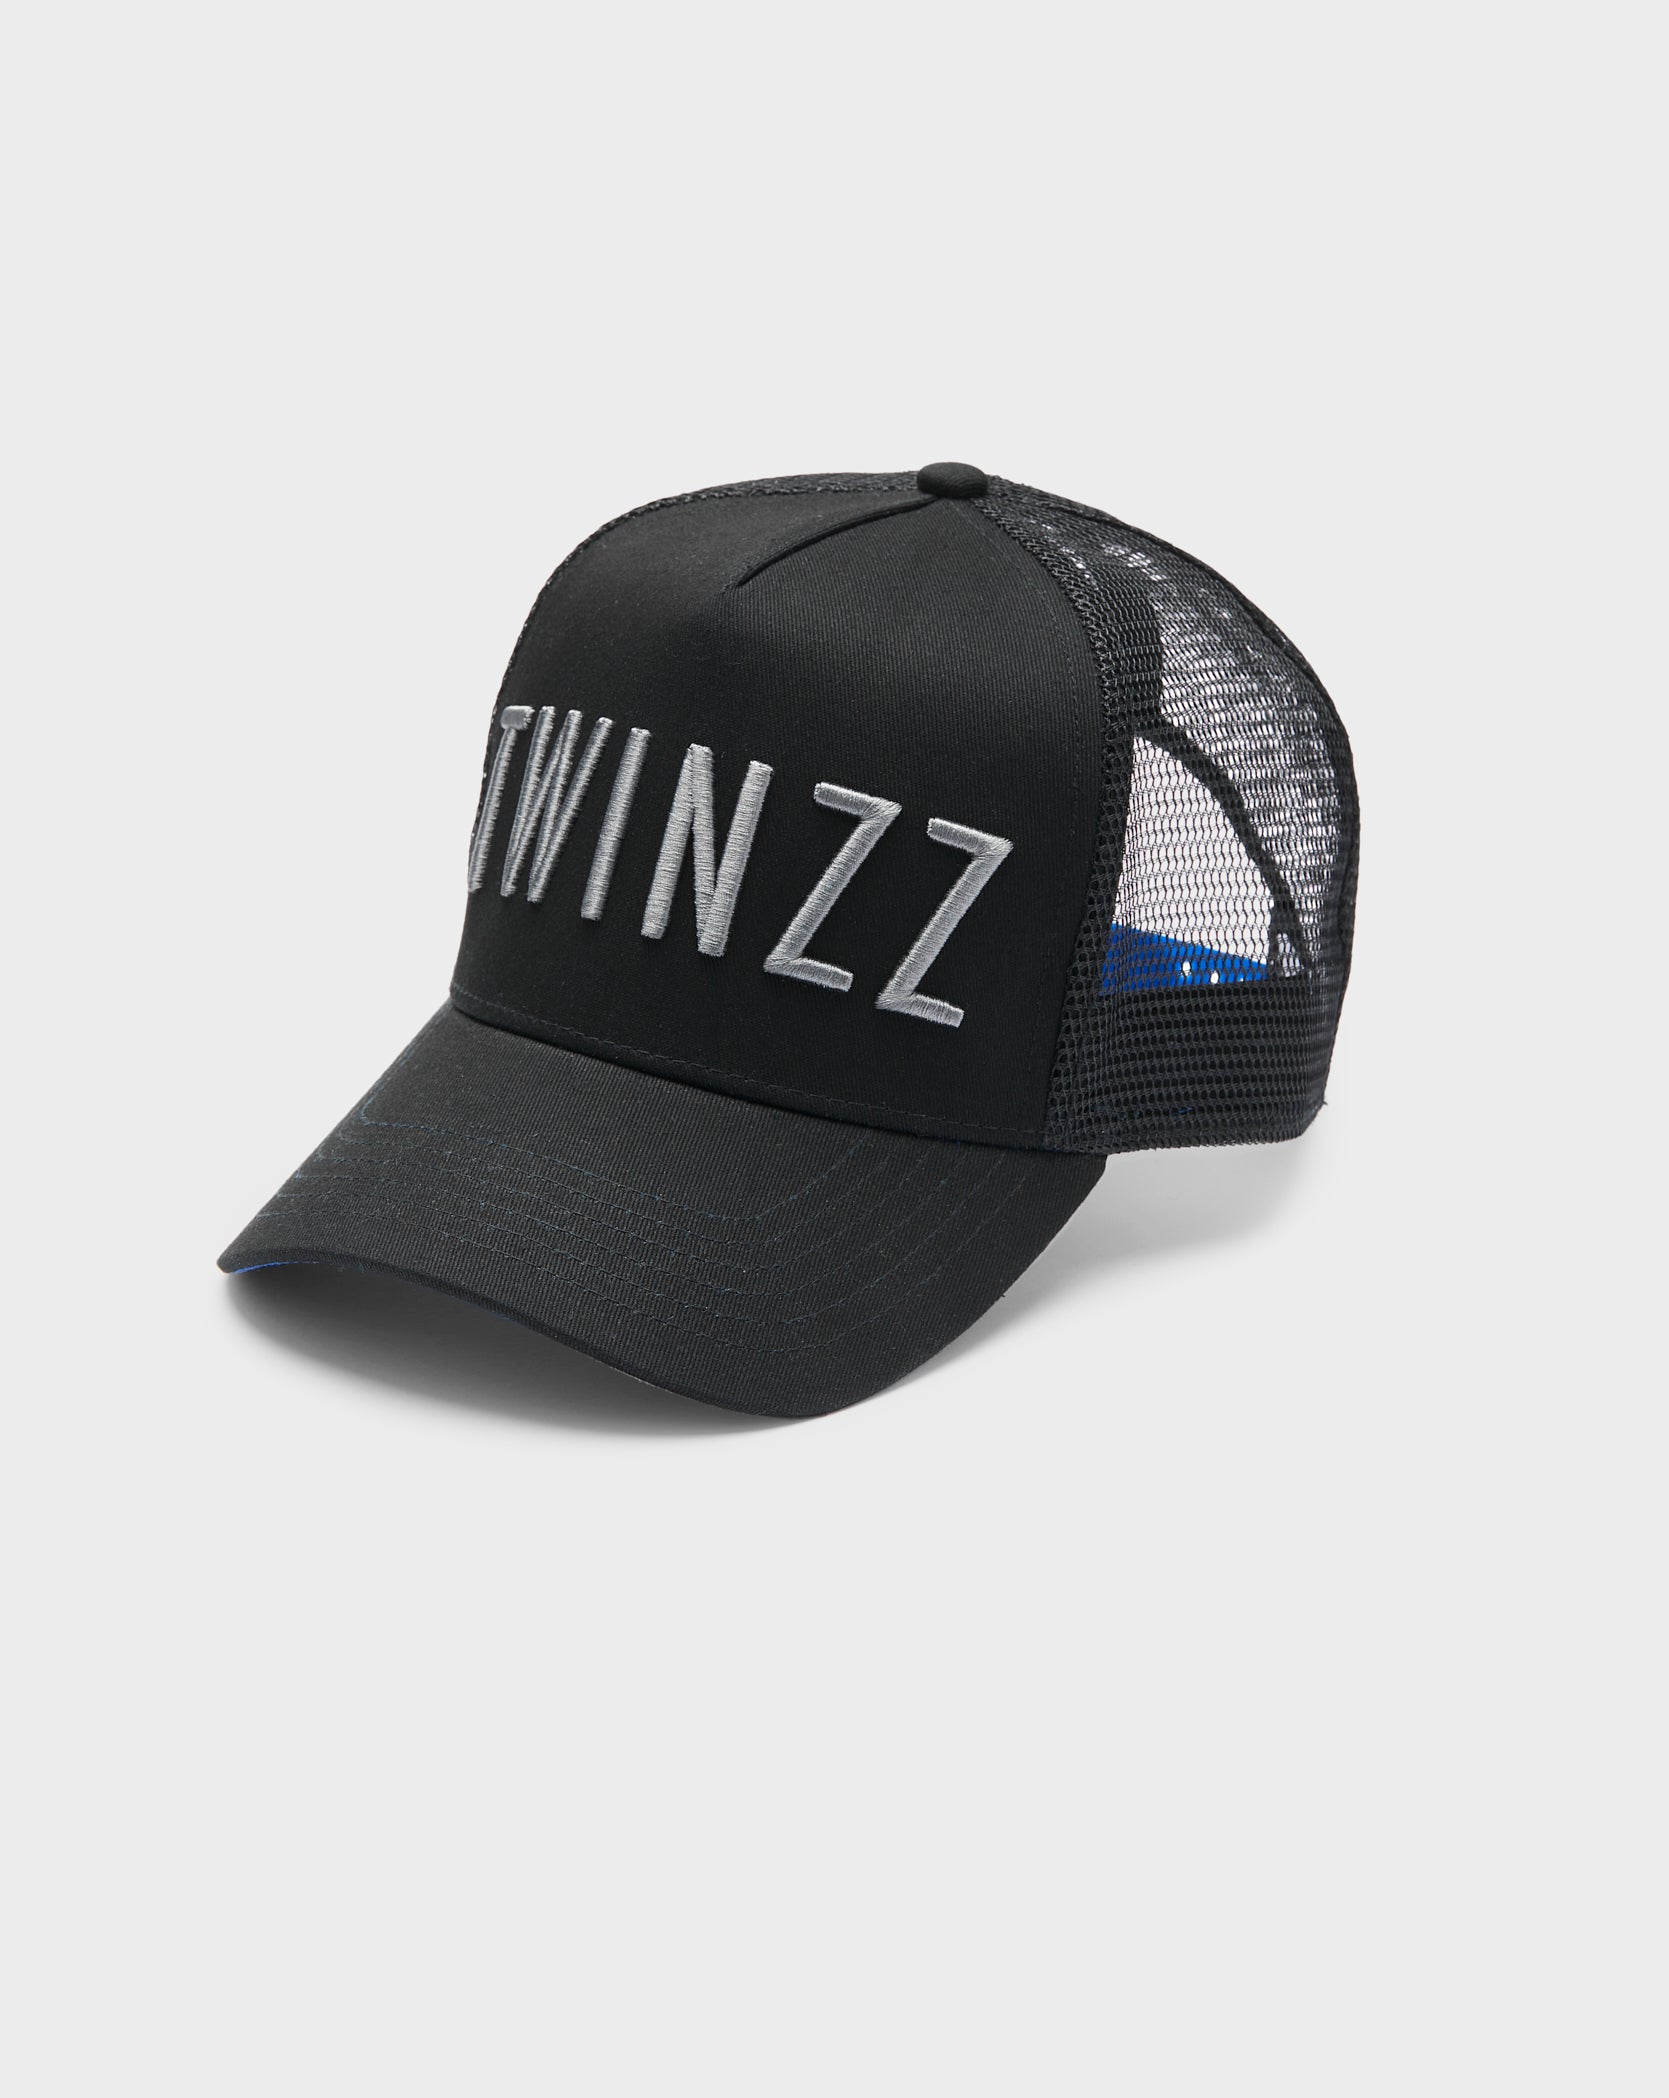 Twinzz black trucker hat with silver logo and blue strap